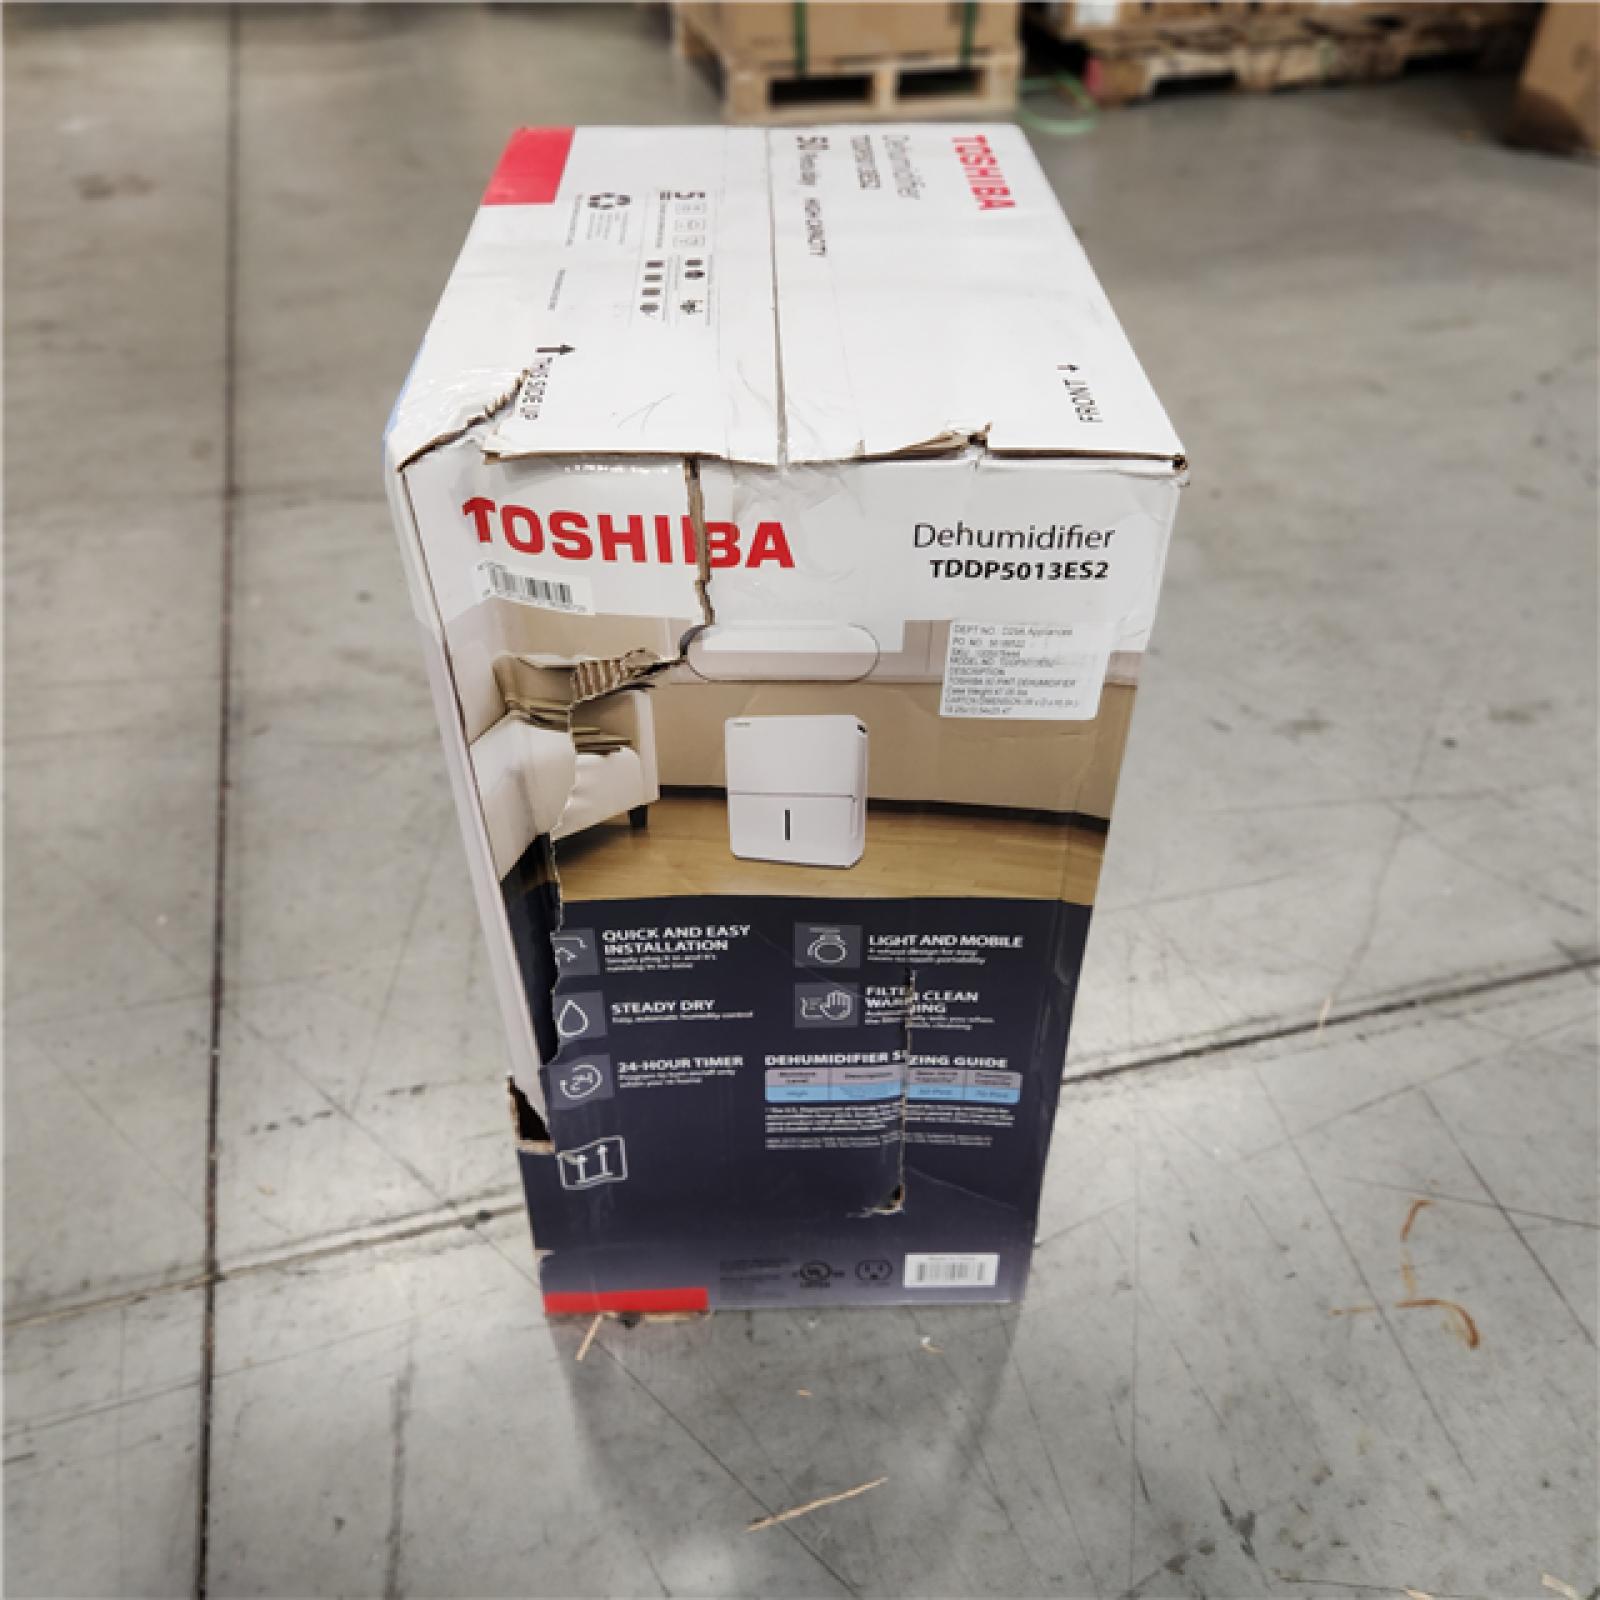 NEW - Toshiba 50-Pint 115-Volt ENERGY STAR MOST EFFICIENT Dehumidifier with Continuous Operation Function covers up to 4,500 sq. ft.